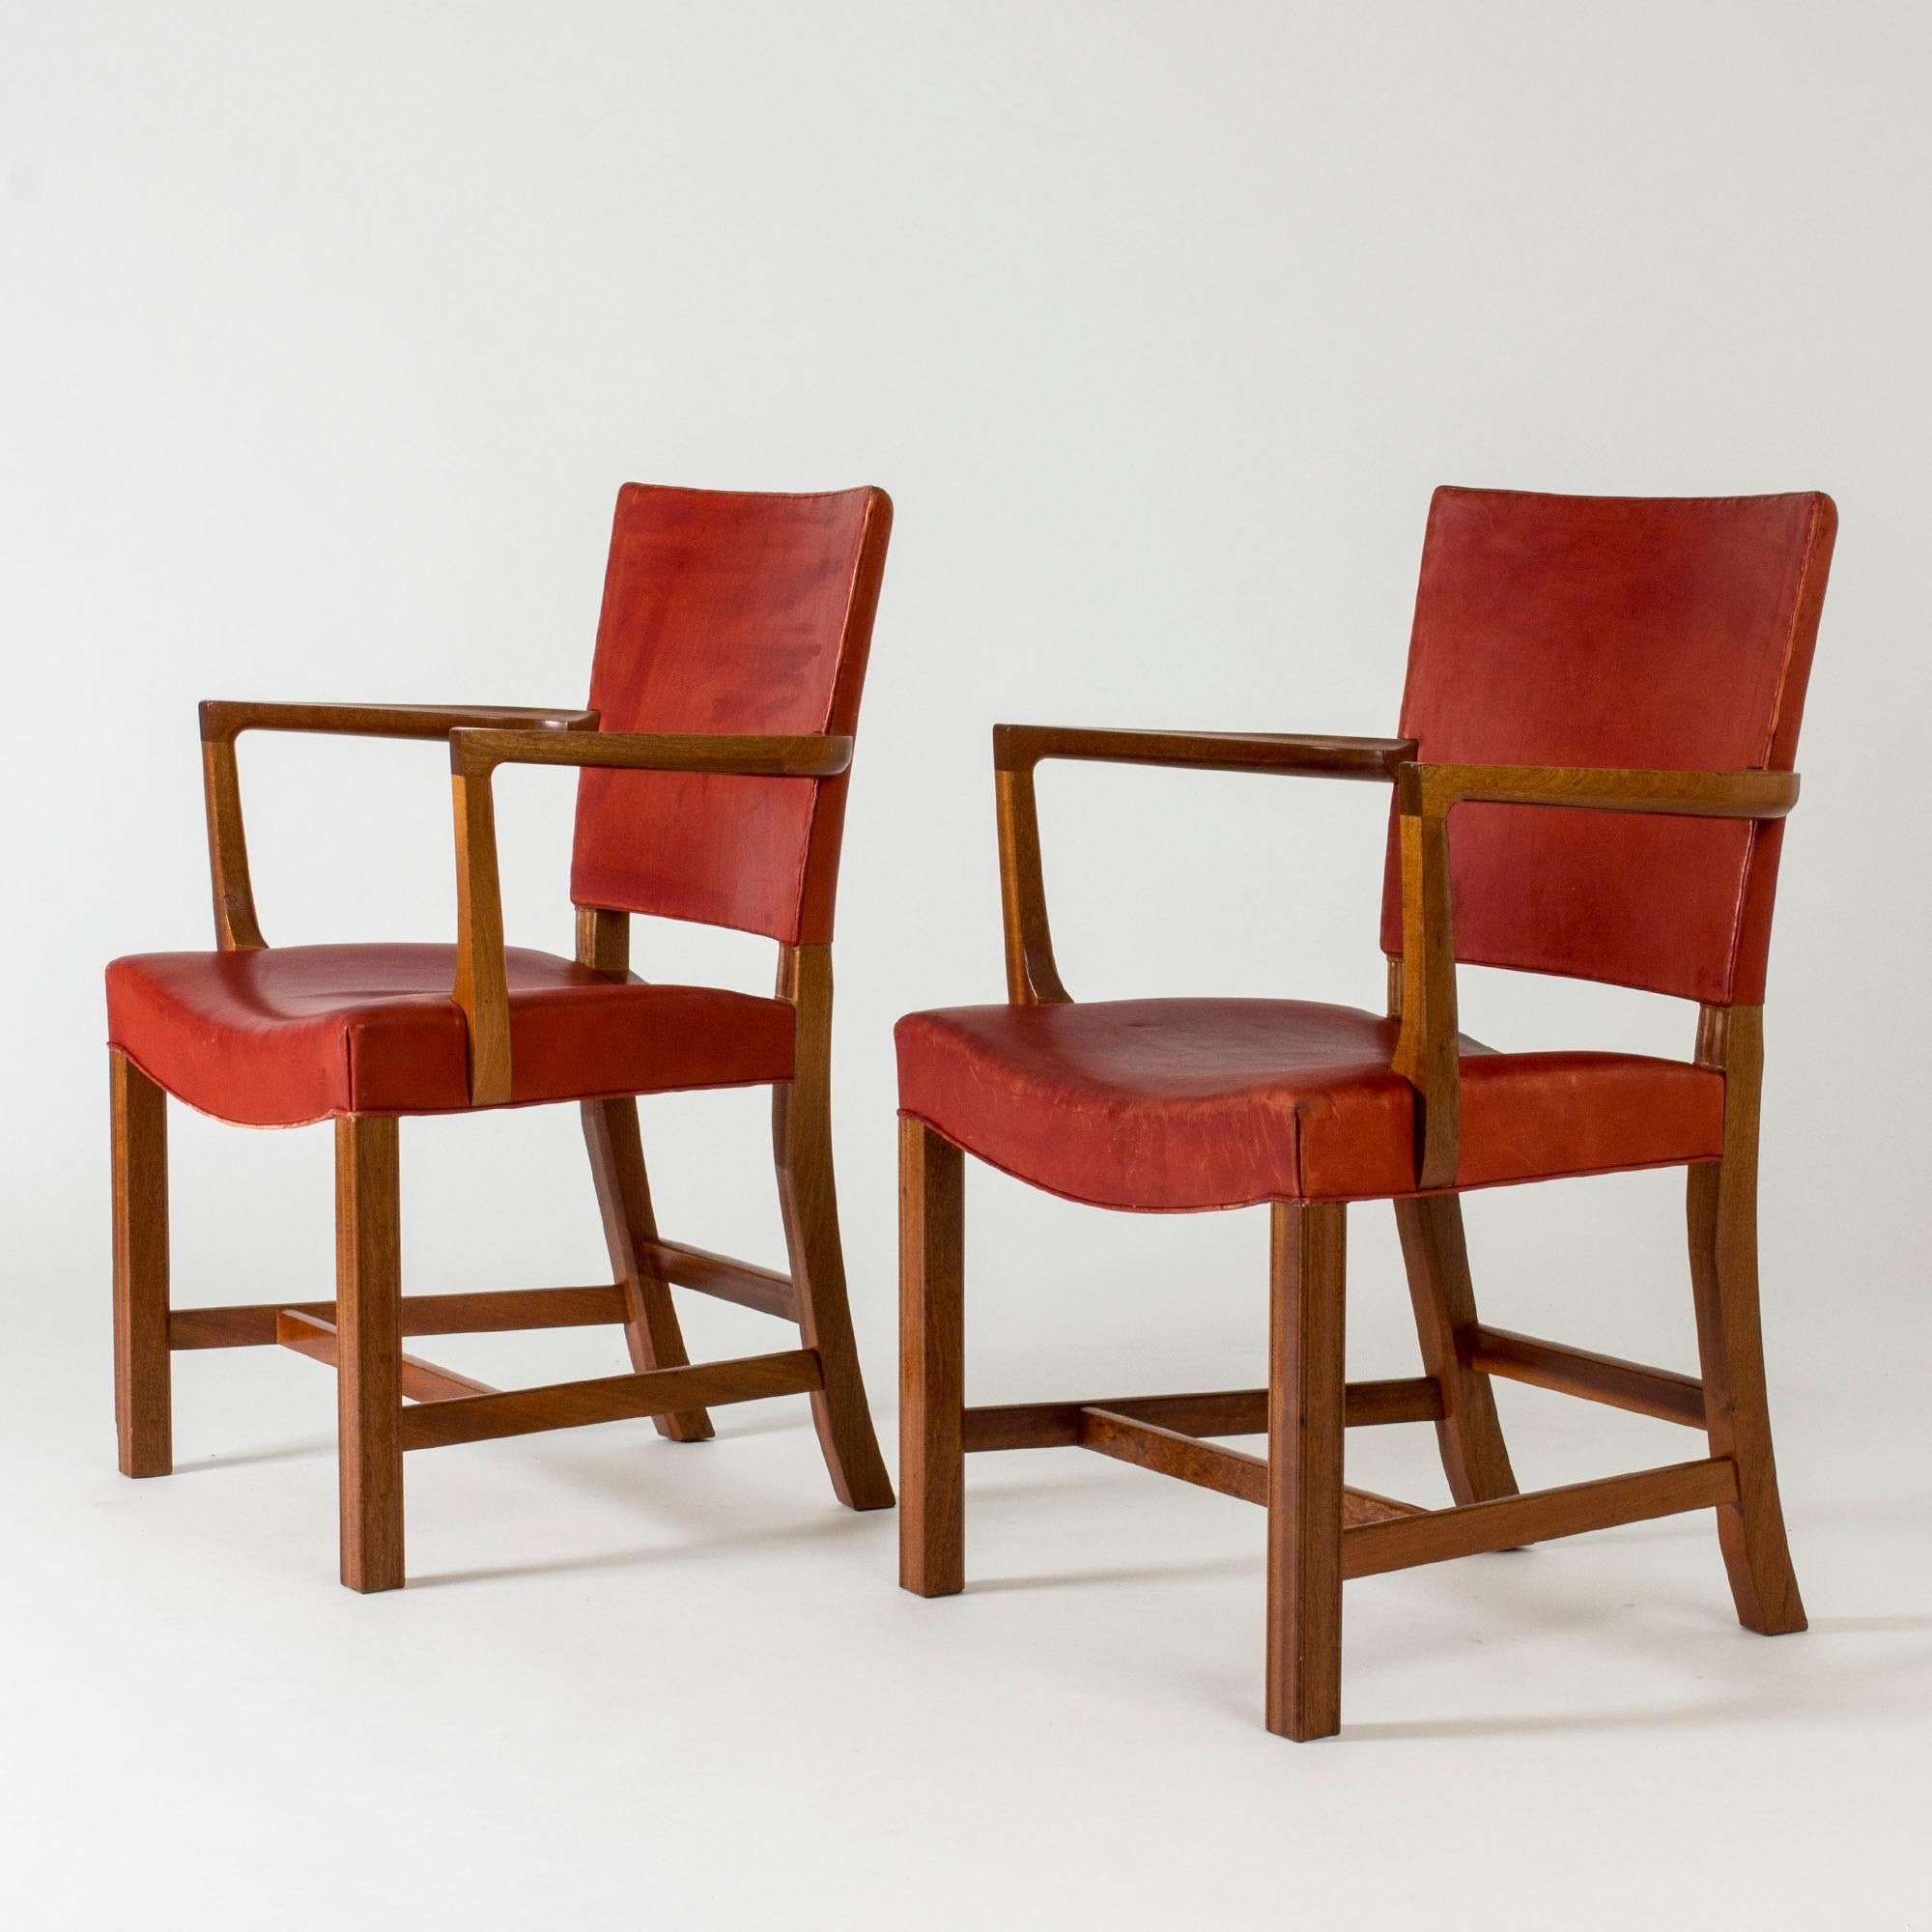 Pair of elegant “Red Chair” armchairs by Kaare Klint, made in mahogany with red leather seats and backs. Sturdy, distinct frames, original leather.